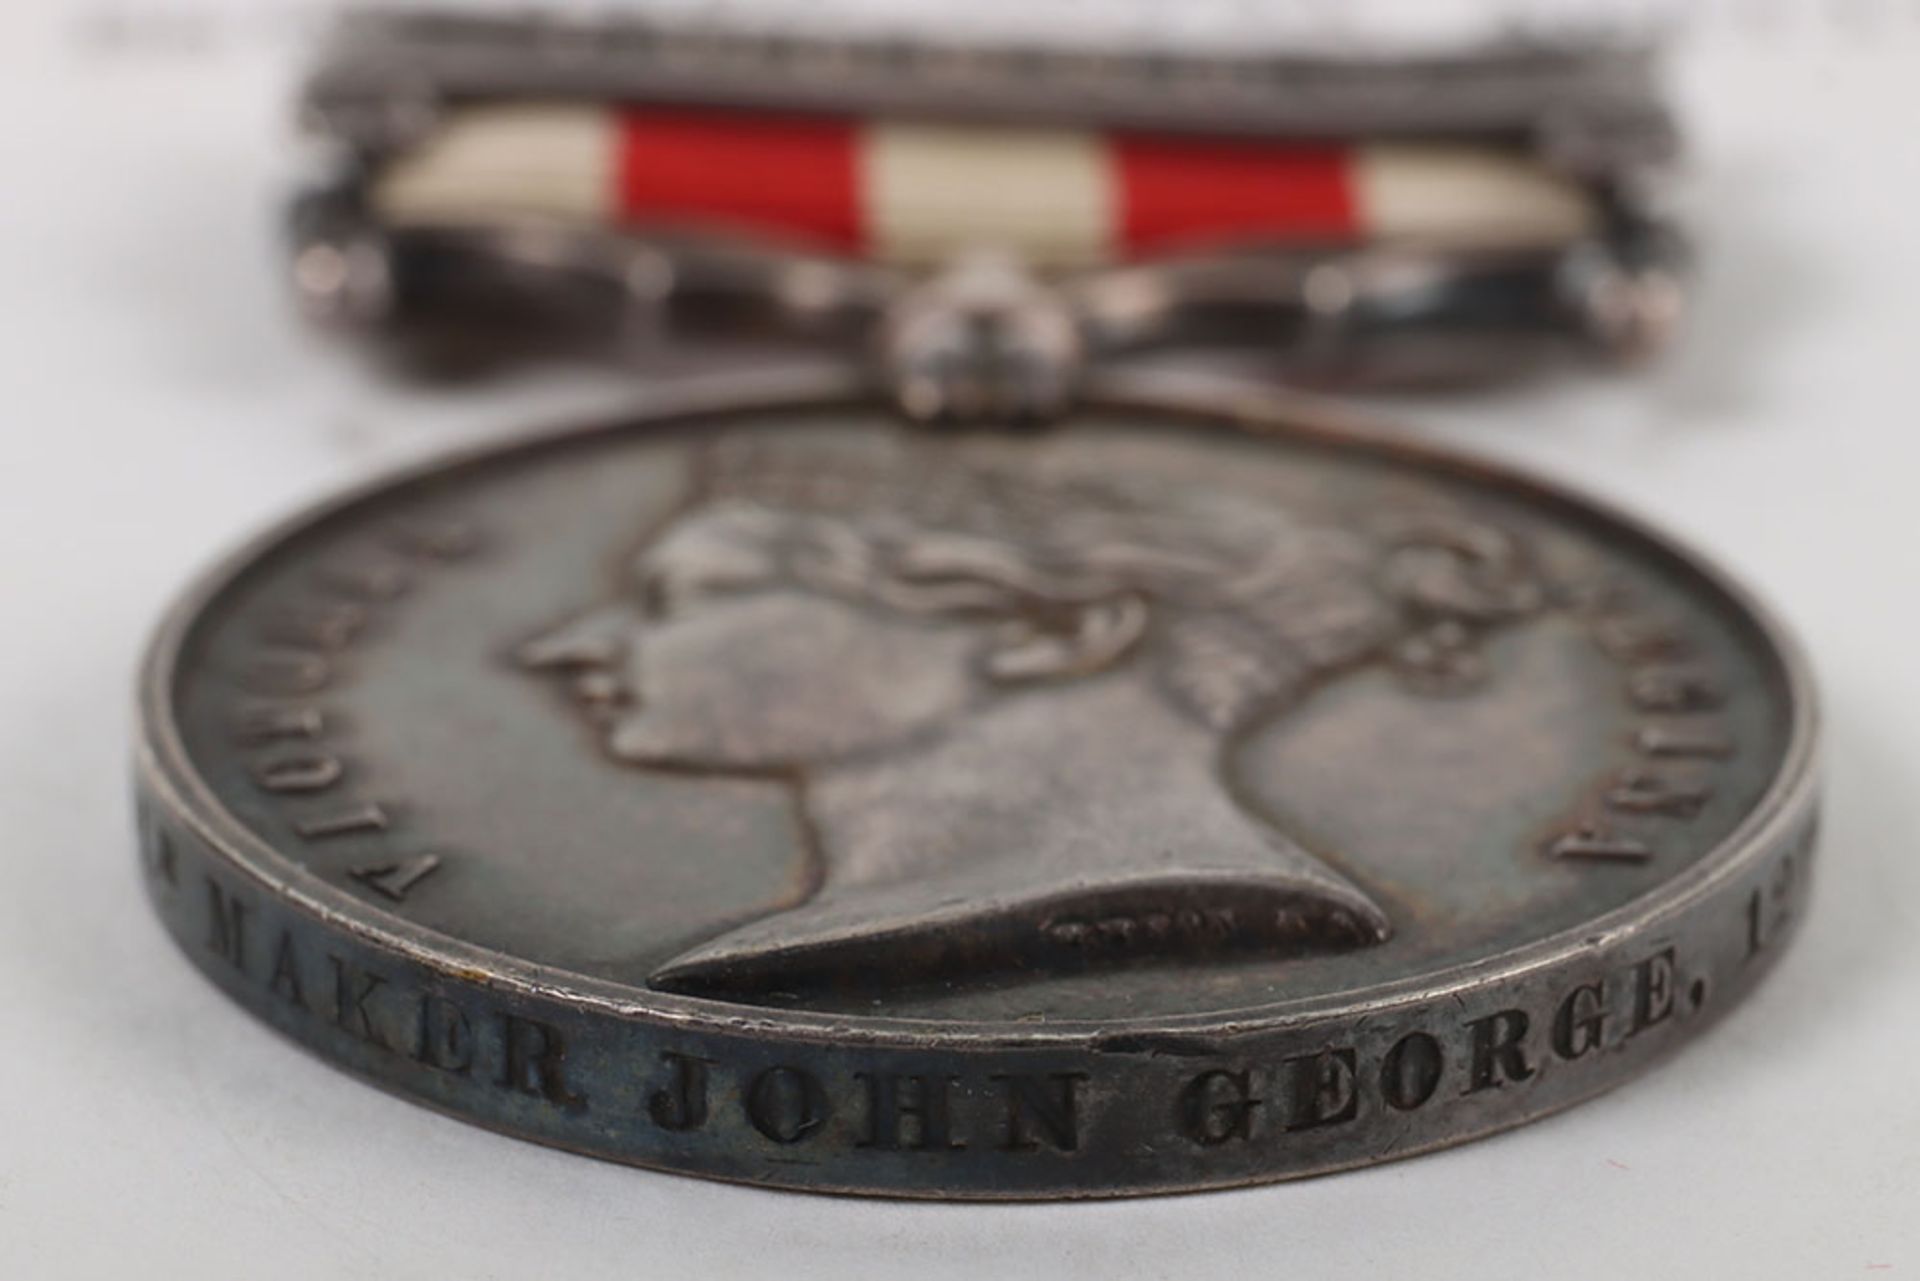 Scarce Rank Indian Mutiny Medal Awarded to a Collar Maker in the Royal Artillery - Bild 5 aus 5